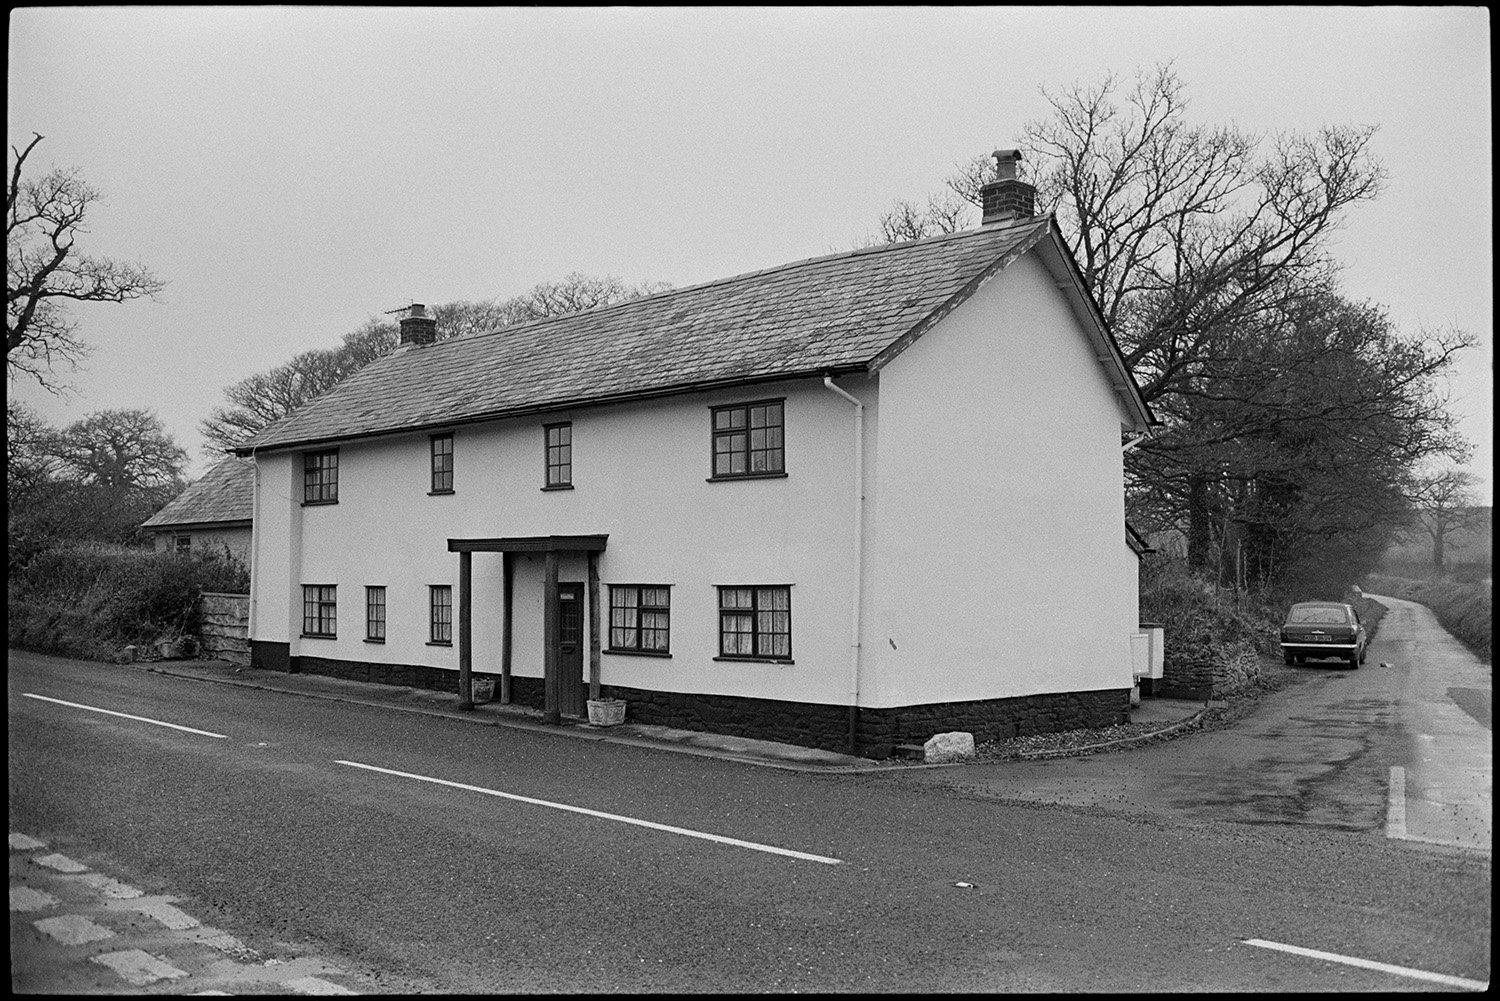 Modernised cottage, see photo in old archive before it was ruined!
[A large modernised cottage at Stopgate Cross near Zeal Monachorum. The cottage is whitewashed, with a porch with wooden supports, and a slate roof. A car is parked on the corner of the road leading to Lapford.]